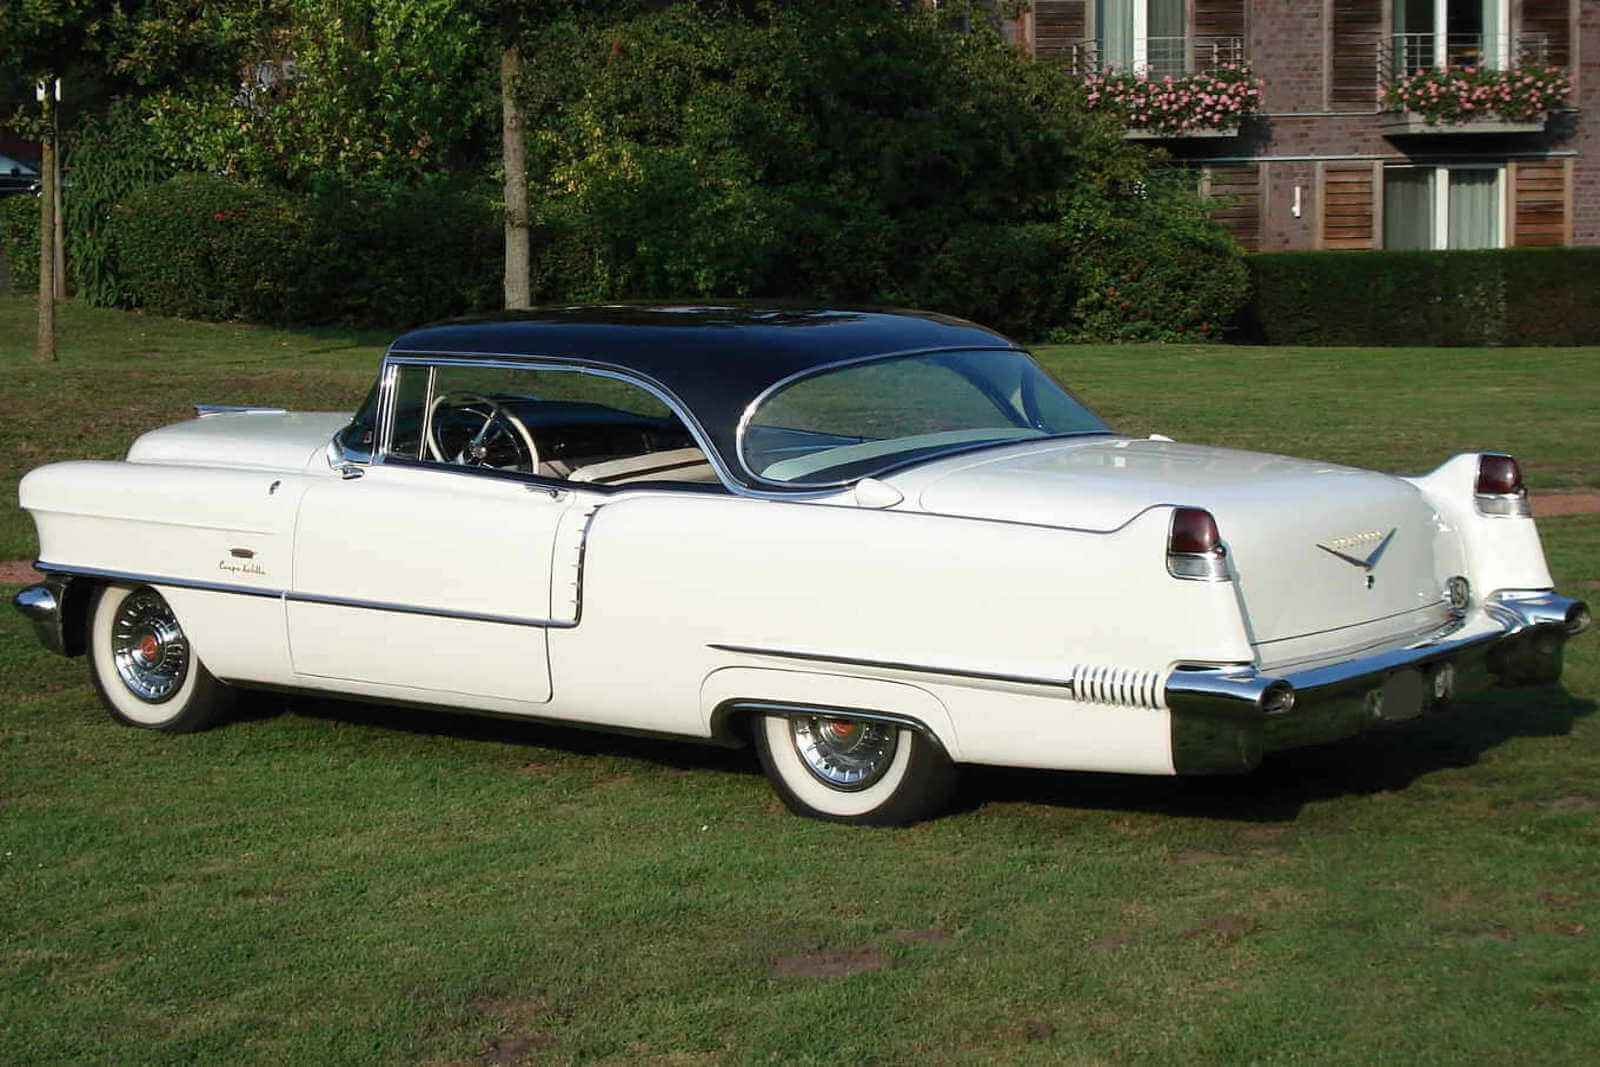 Cadillac-Coupe_1-1 (1)